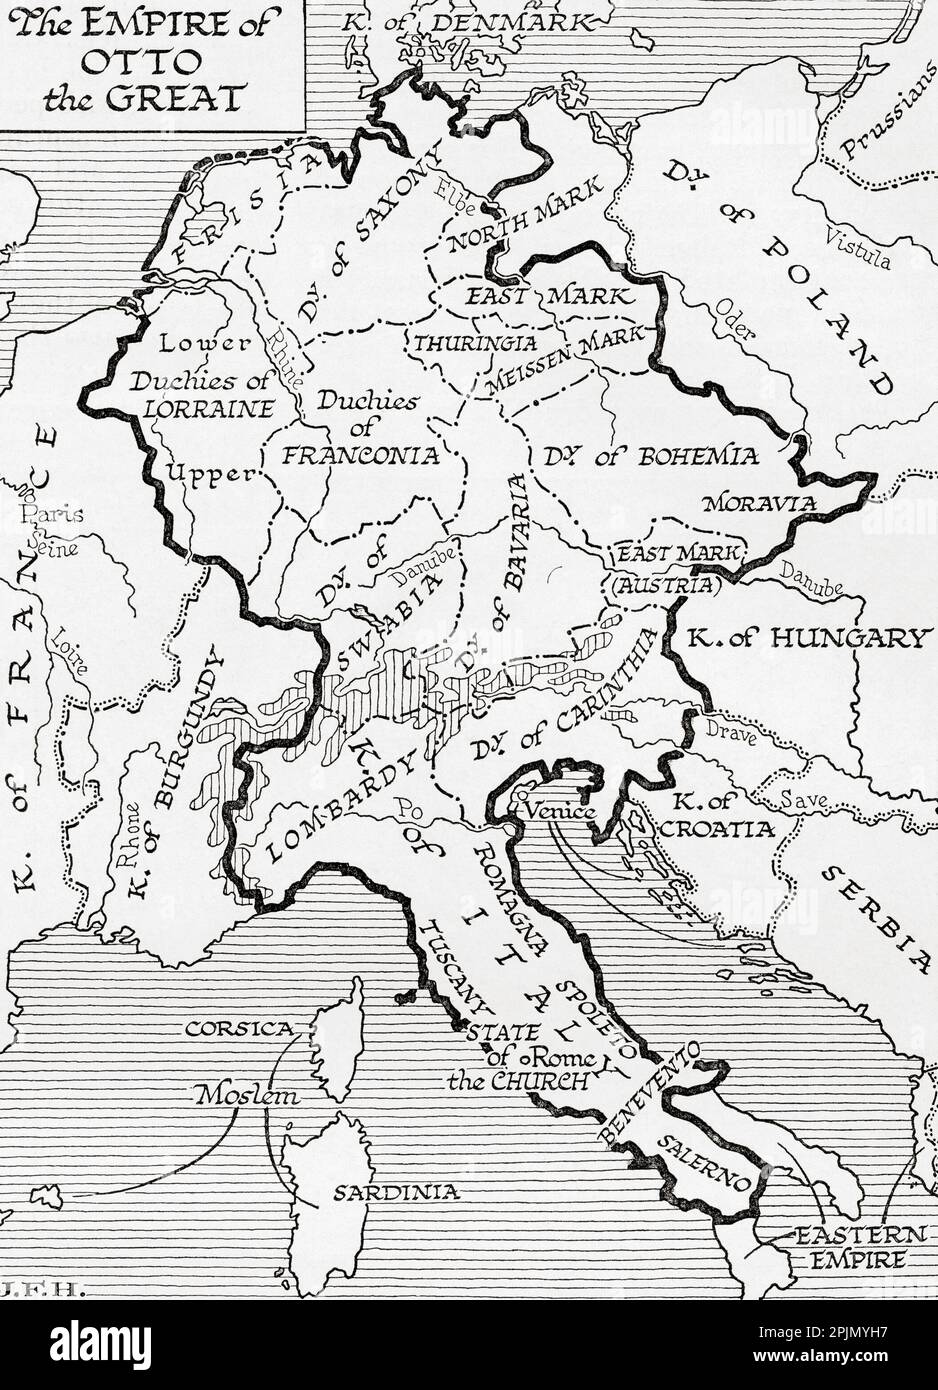 Map of the empire of Otto the Great, 10th century.  From the book Outline of History by H.G. Wells, published 1920. Stock Photo